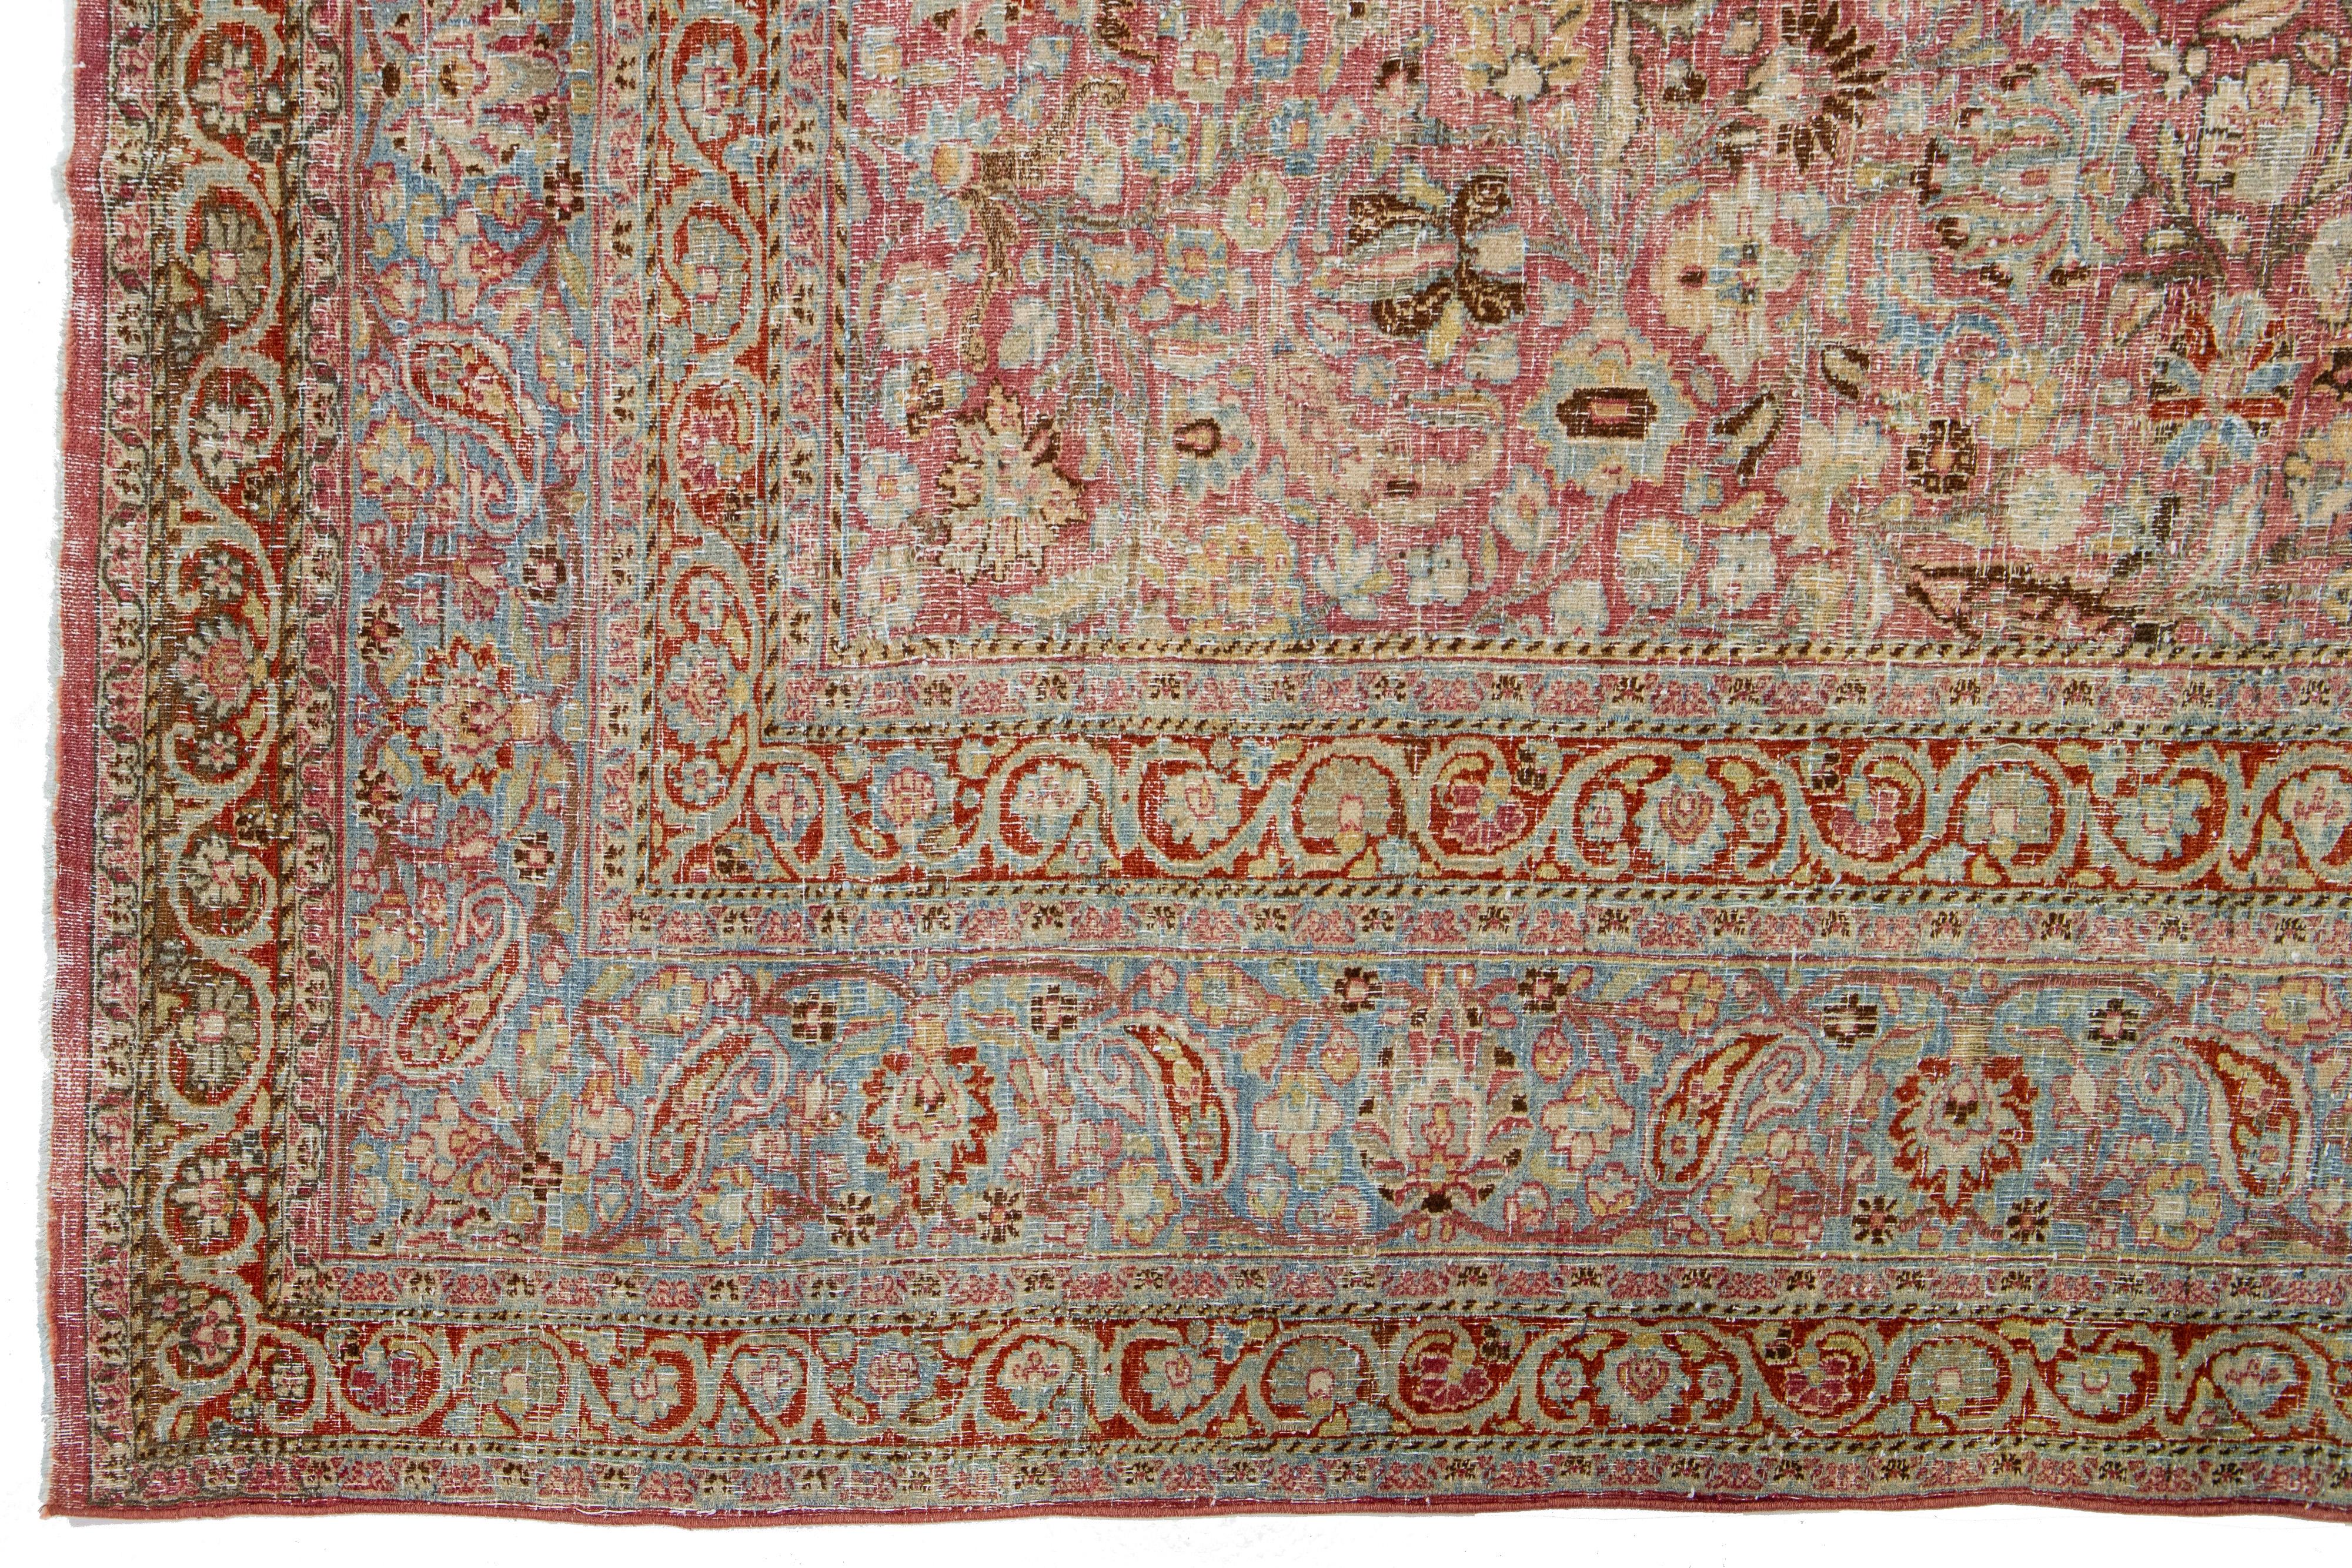 Antique Persian Mashad Handmade Red Wool Rug with Allover Floral Design In Good Condition For Sale In Norwalk, CT